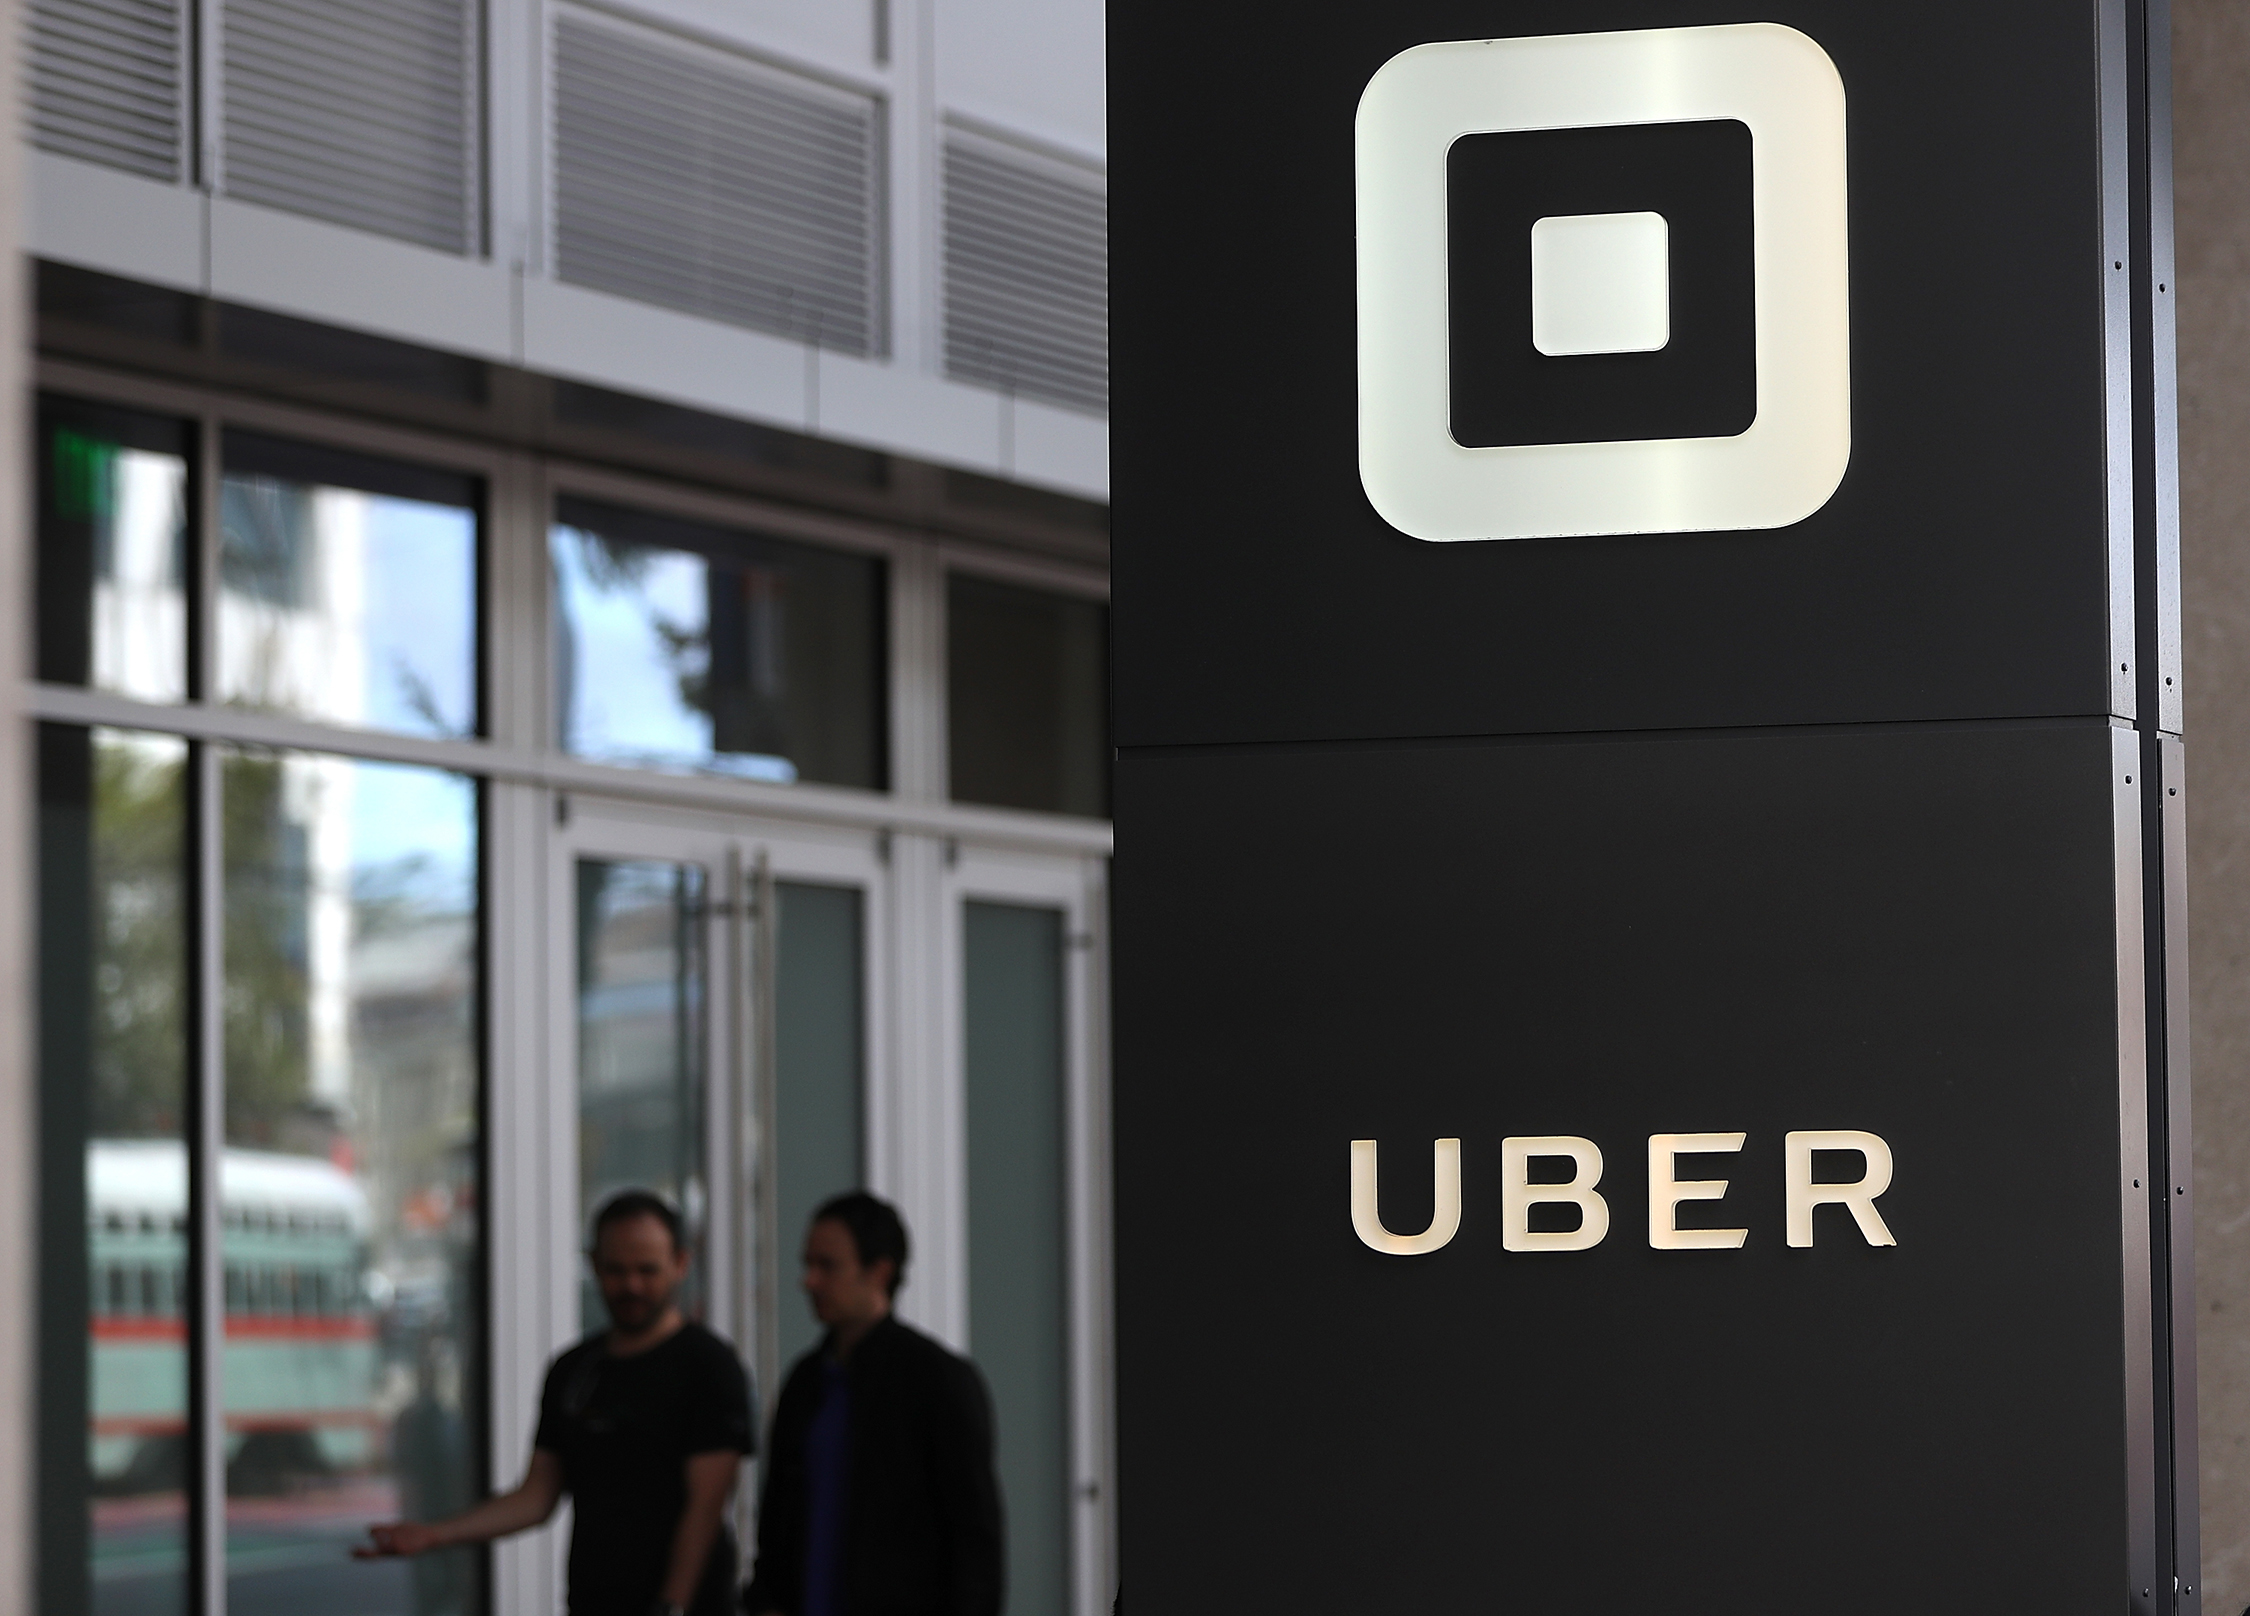 Three engineers sue Uber over unequal pay, claiming sex and racial discrimination